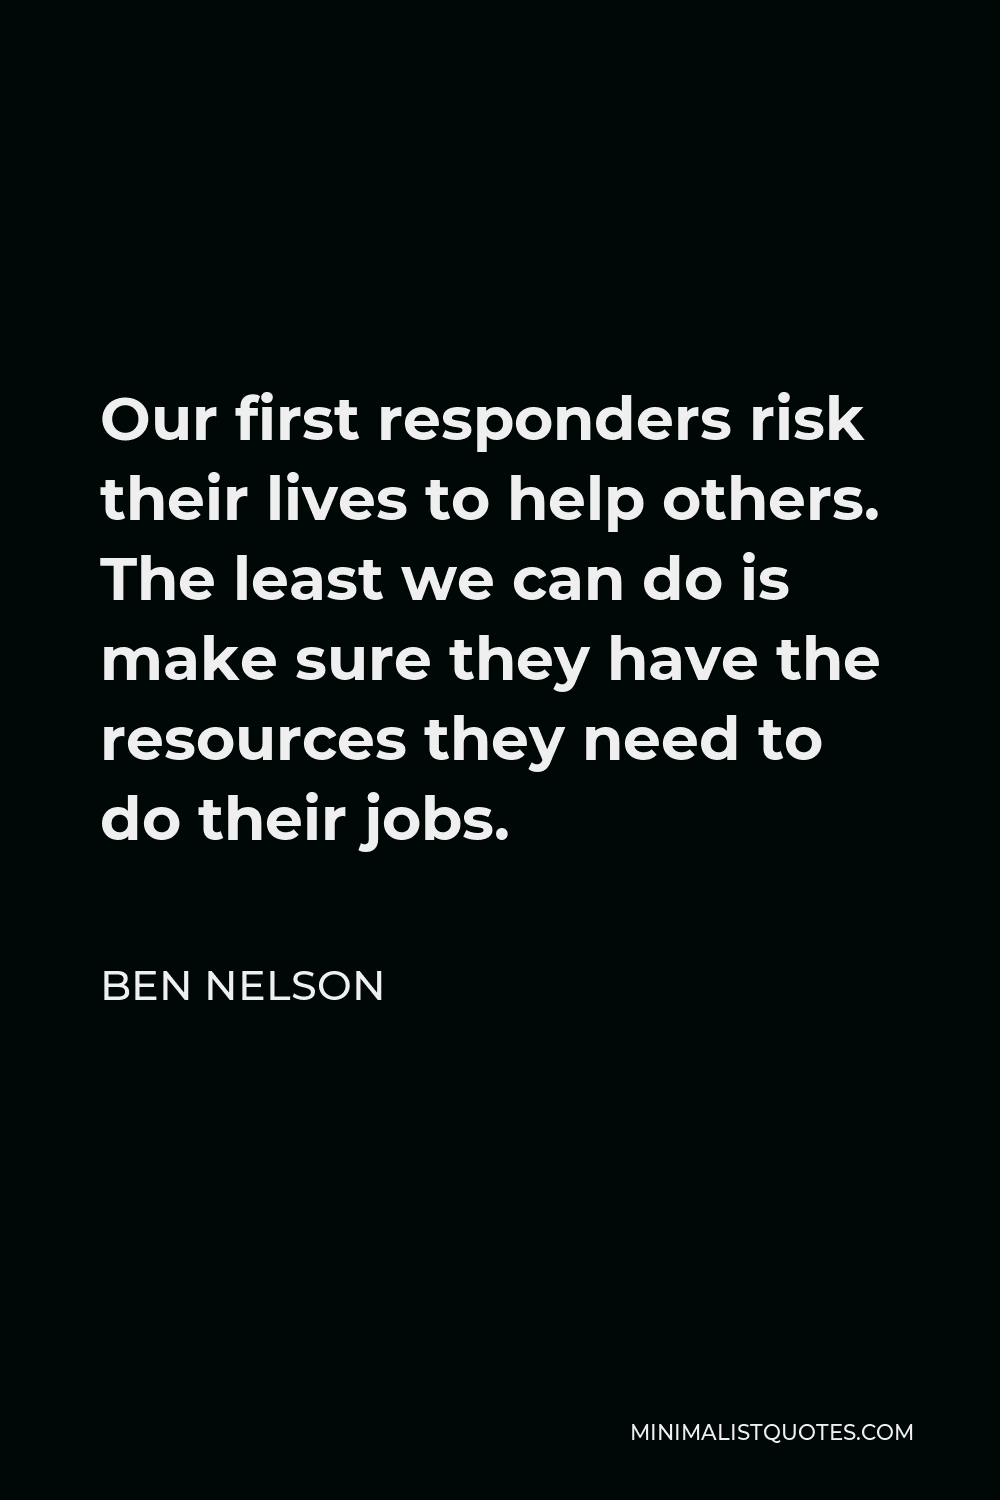 Ben Nelson Quote - Our first responders risk their lives to help others. The least we can do is make sure they have the resources they need to do their jobs.